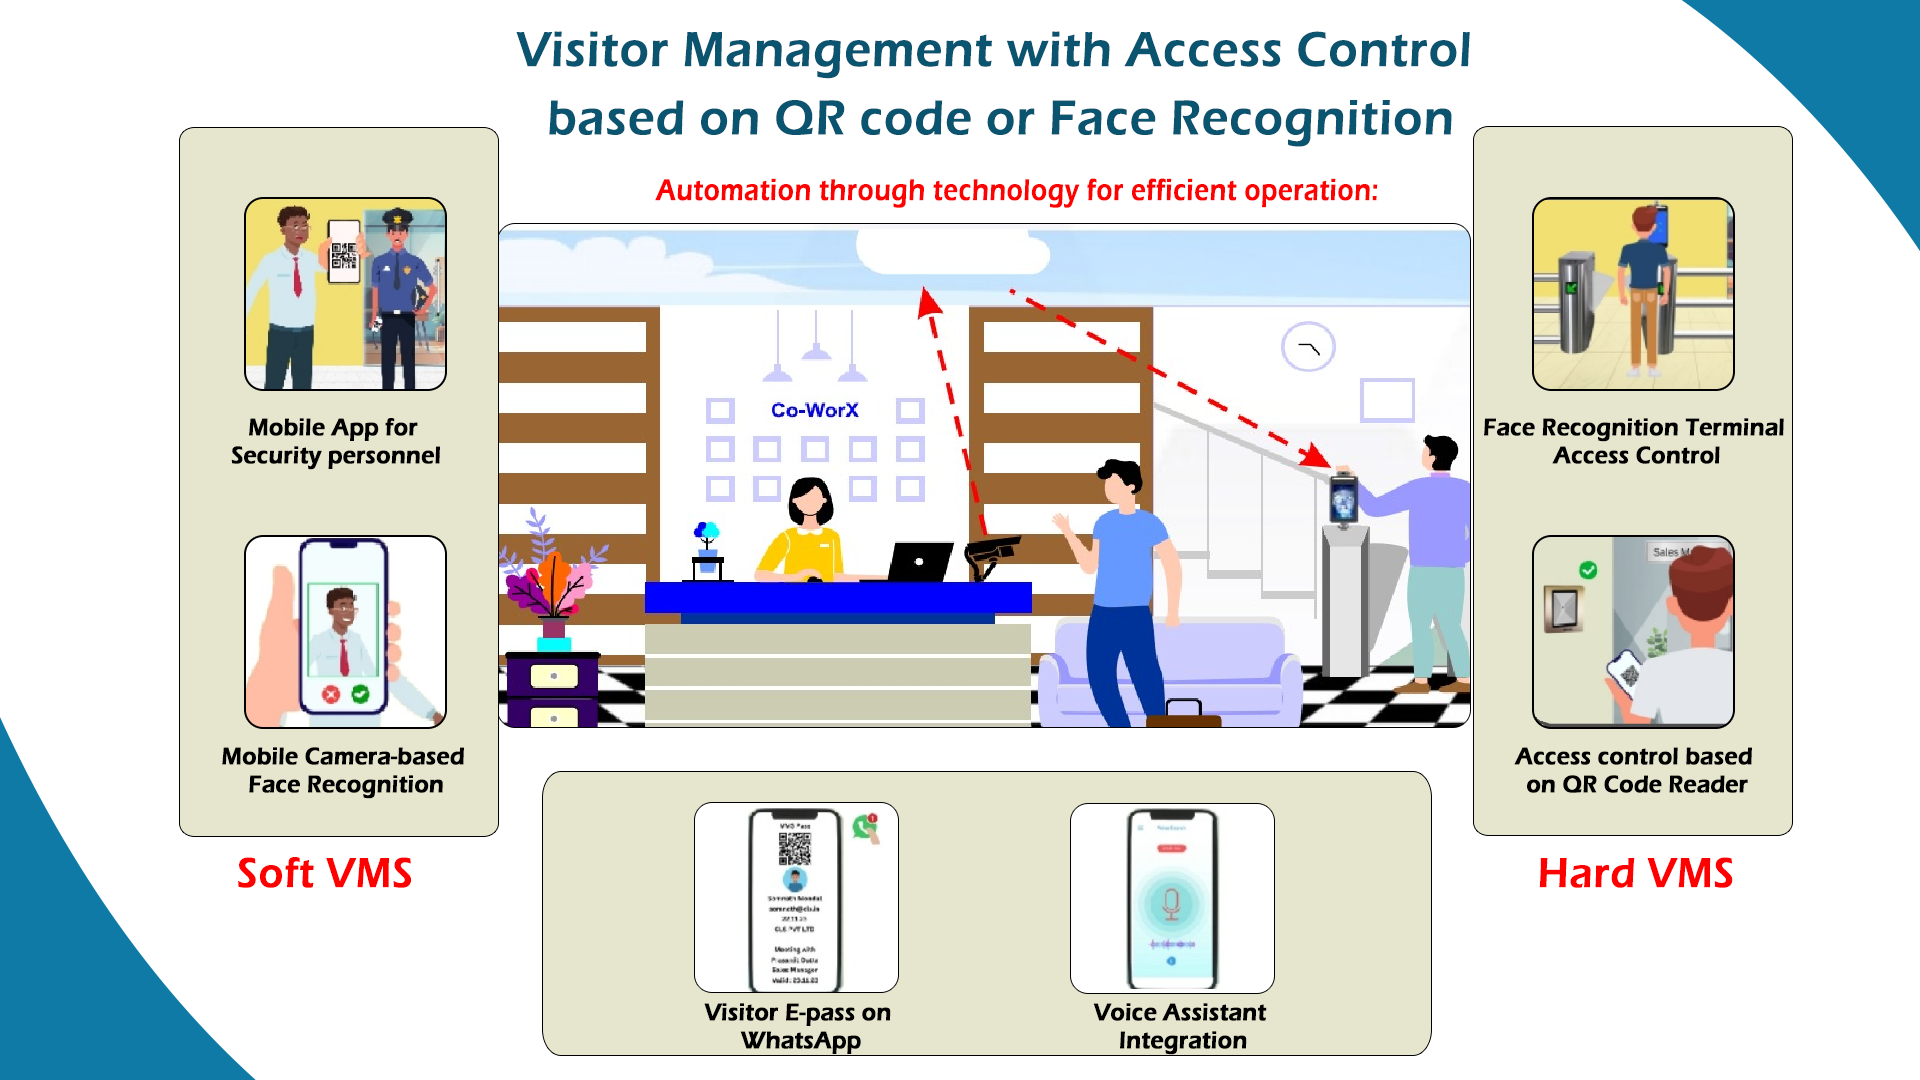 Visitor Management with Access Control